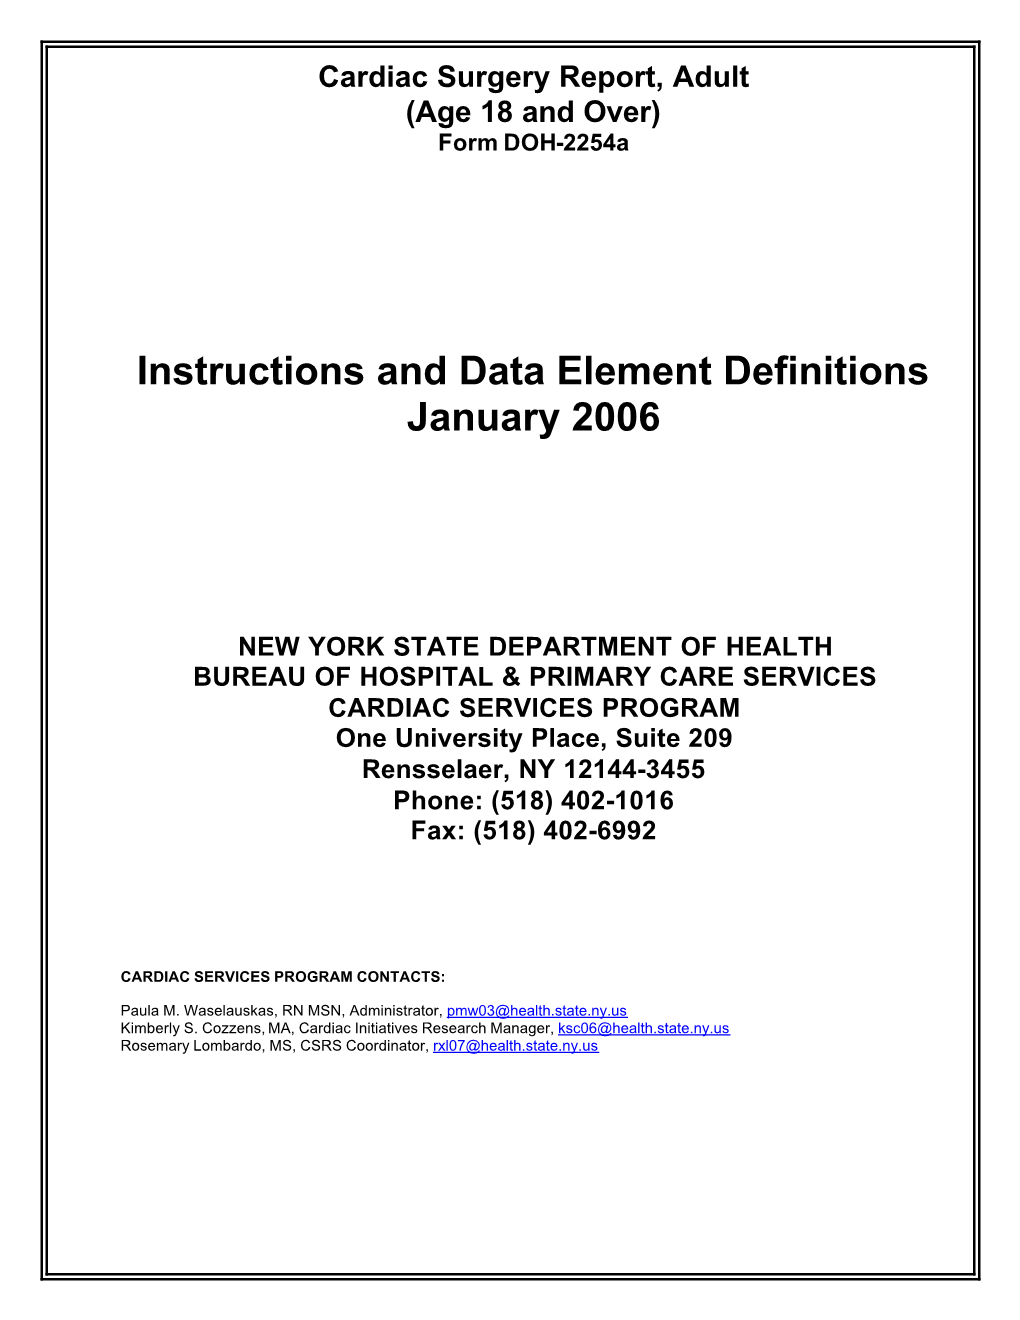 Instructions and Data Element Definitions for January 2006